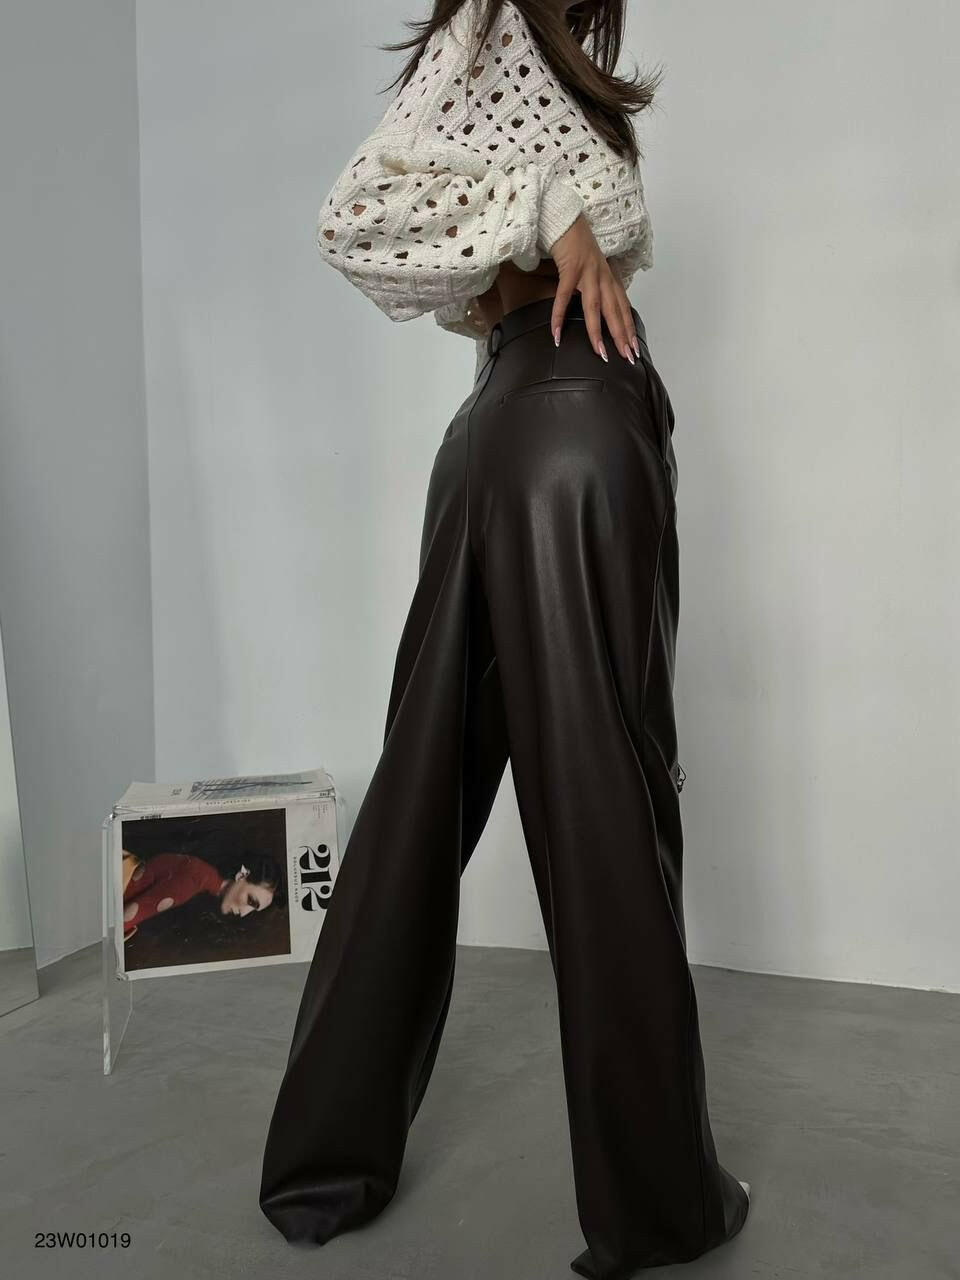 Pleated Wide-Leg Leather Pants Brown  - Noxlook.